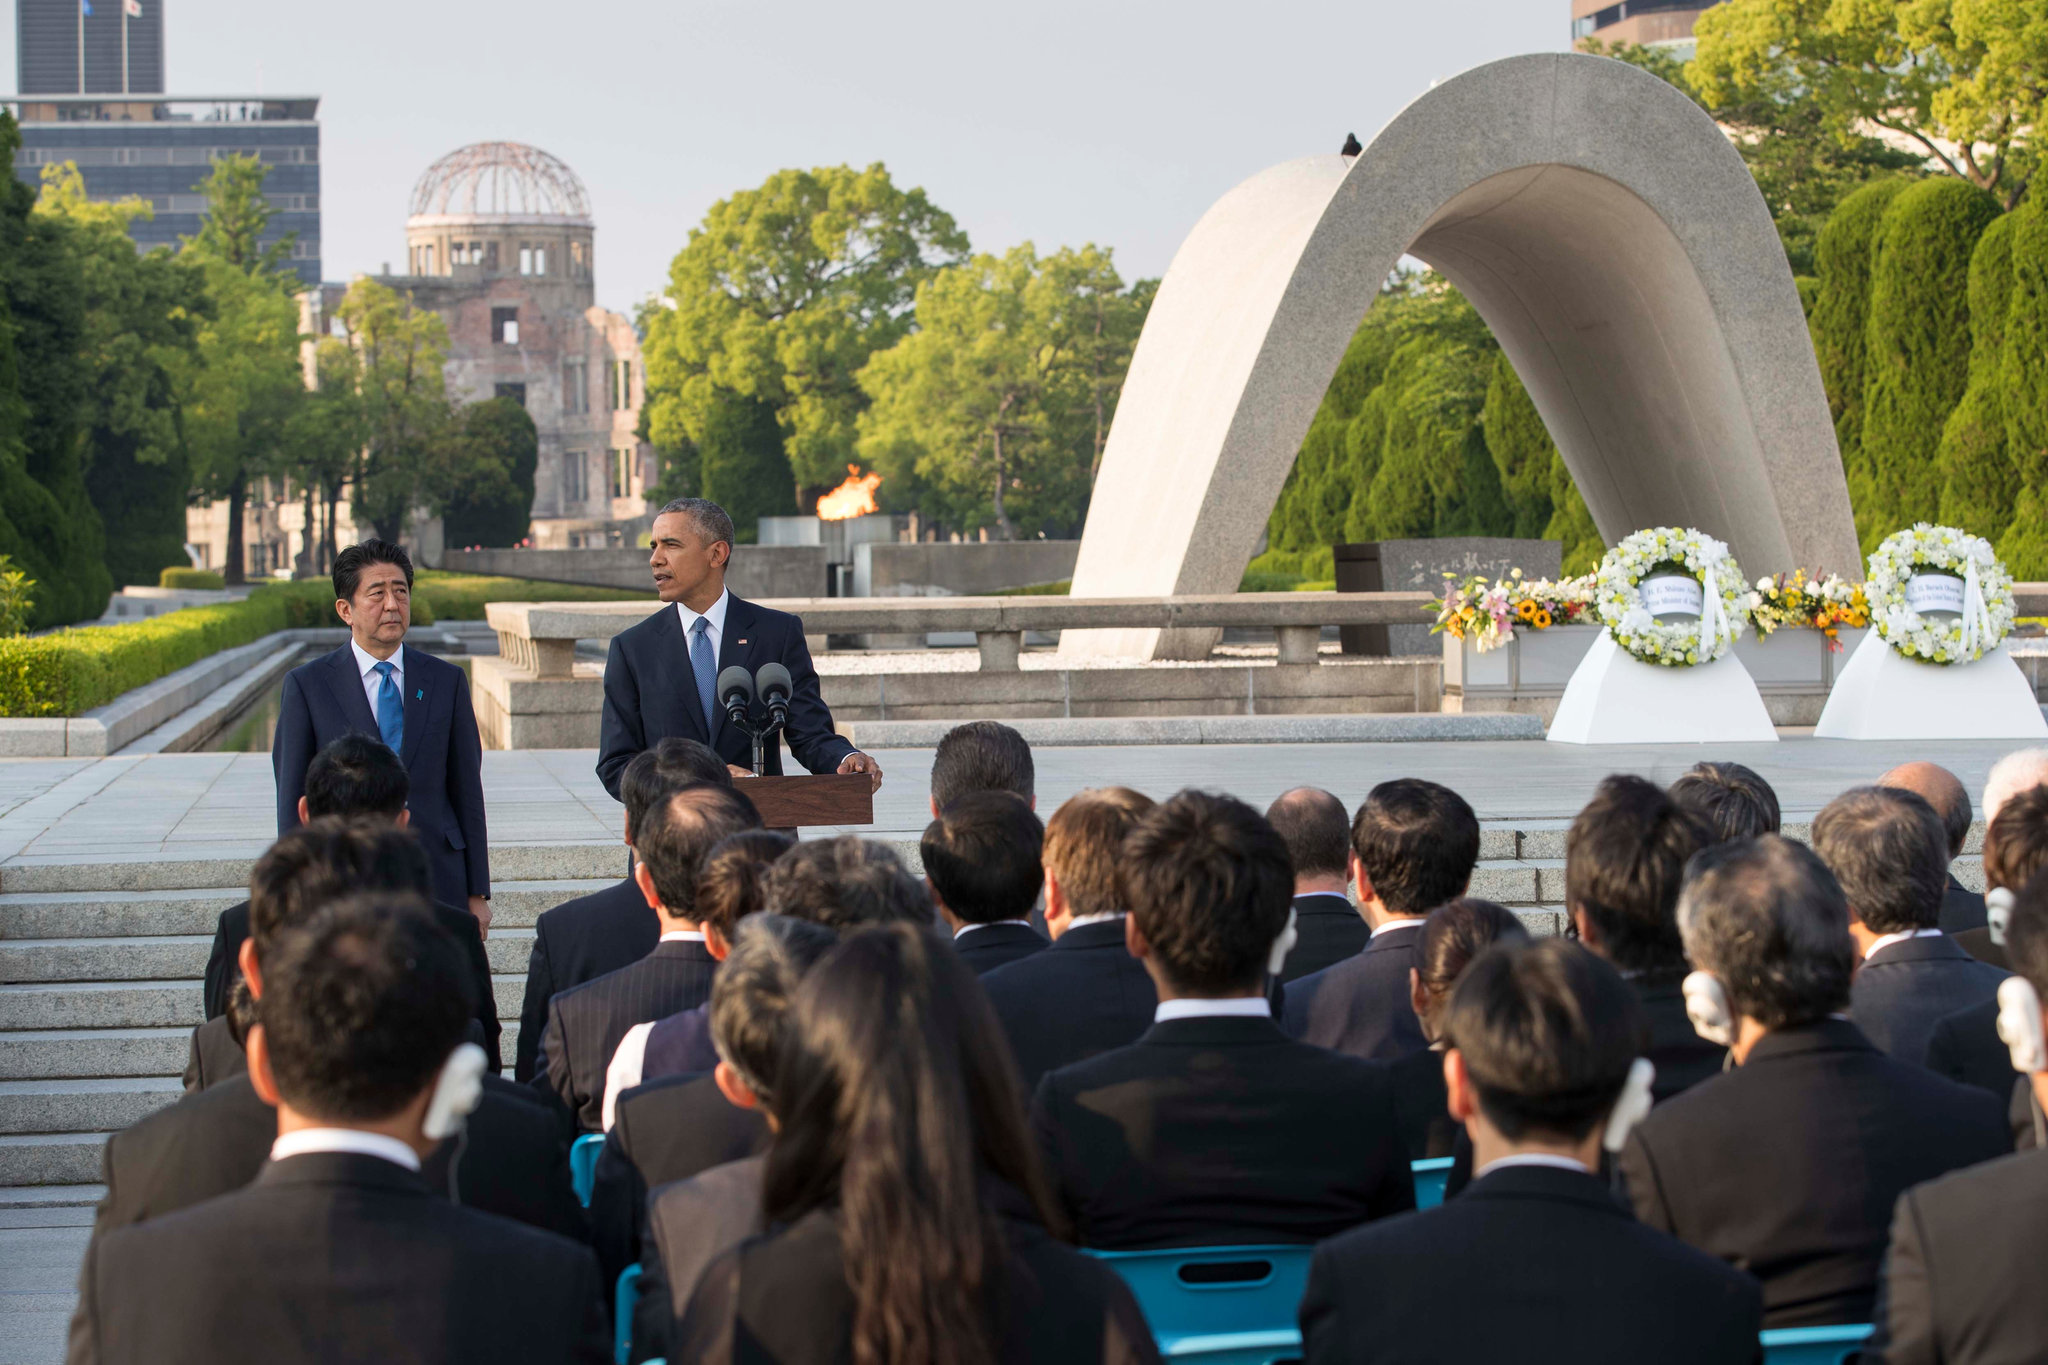 Japanese Prime Minister Shinzo Abe and President Barack Obama at the Hiroshima Peace Memorial Park. Photo by Doug Mills/The New York Times